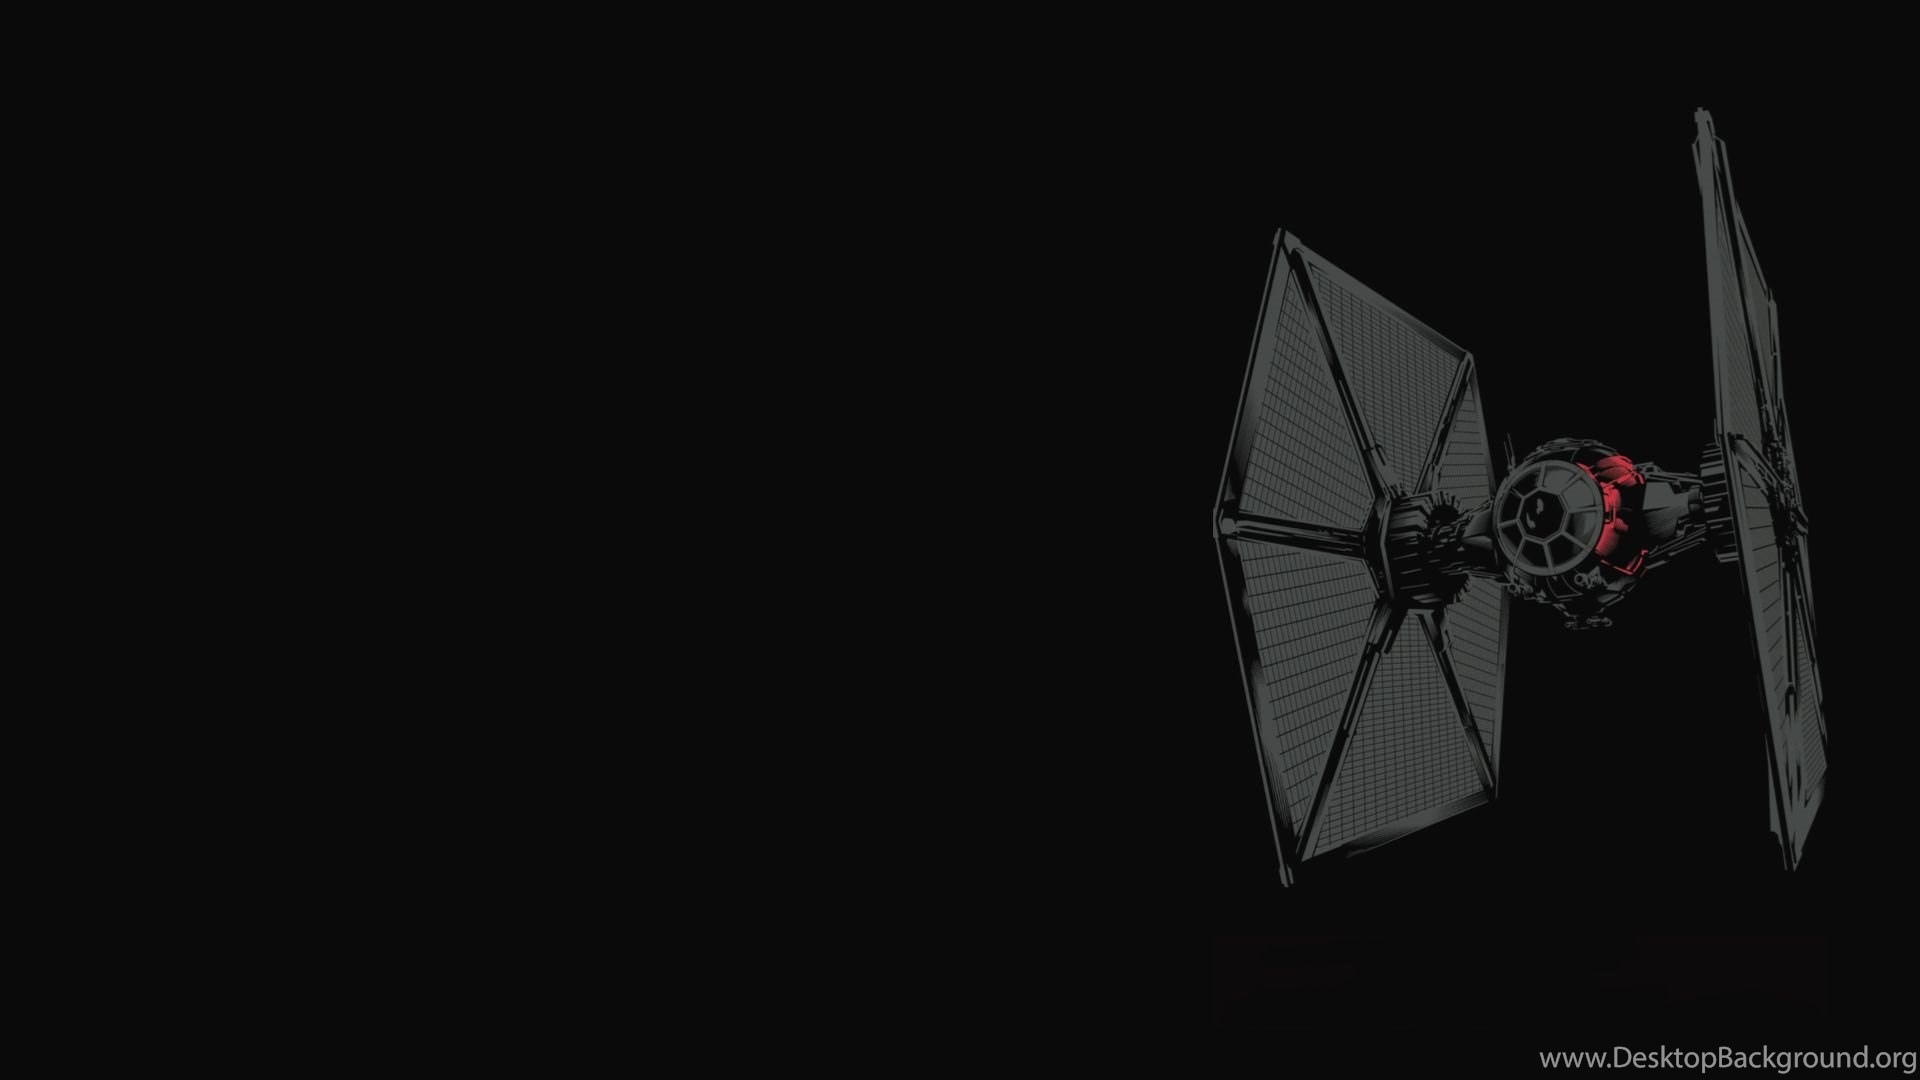 I Made A Wallpaper Out Of That TIE Fighter Image From The Toy Leak. Desktop Background